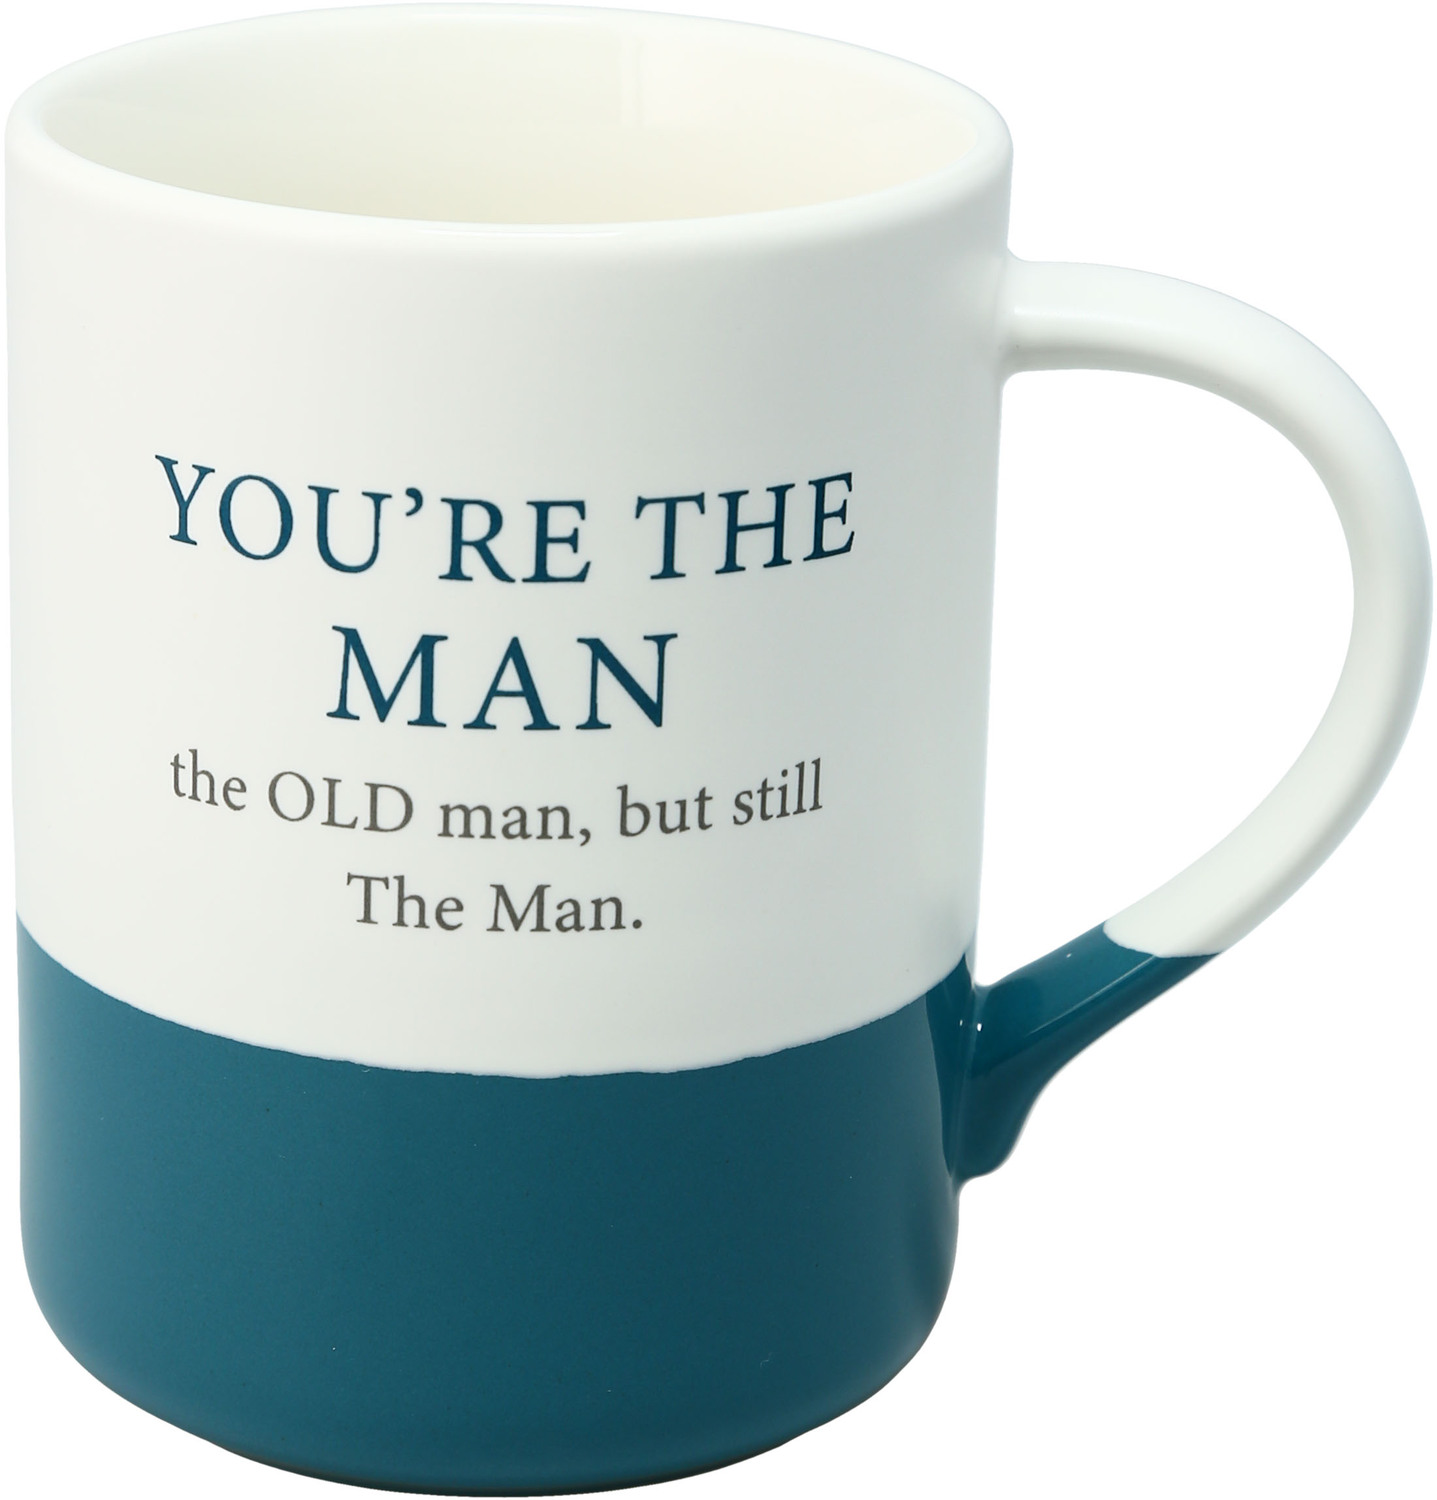 You're The Man by A-Parent-ly - You're The Man - 18 oz Mug